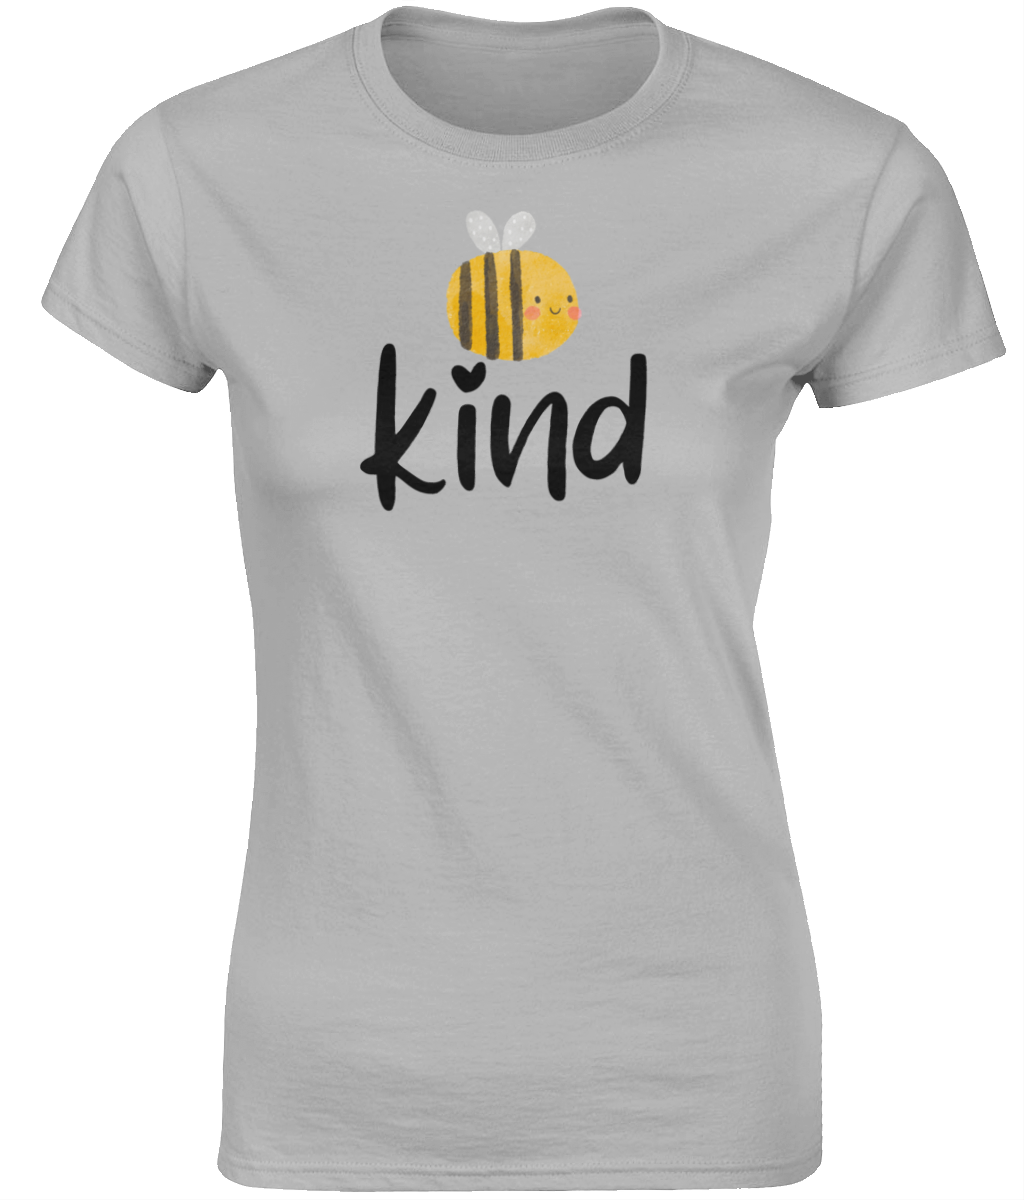 Be Kind 1 | Gildan SoftStyle® Ladies Fitted Ringspun T-Shirt.